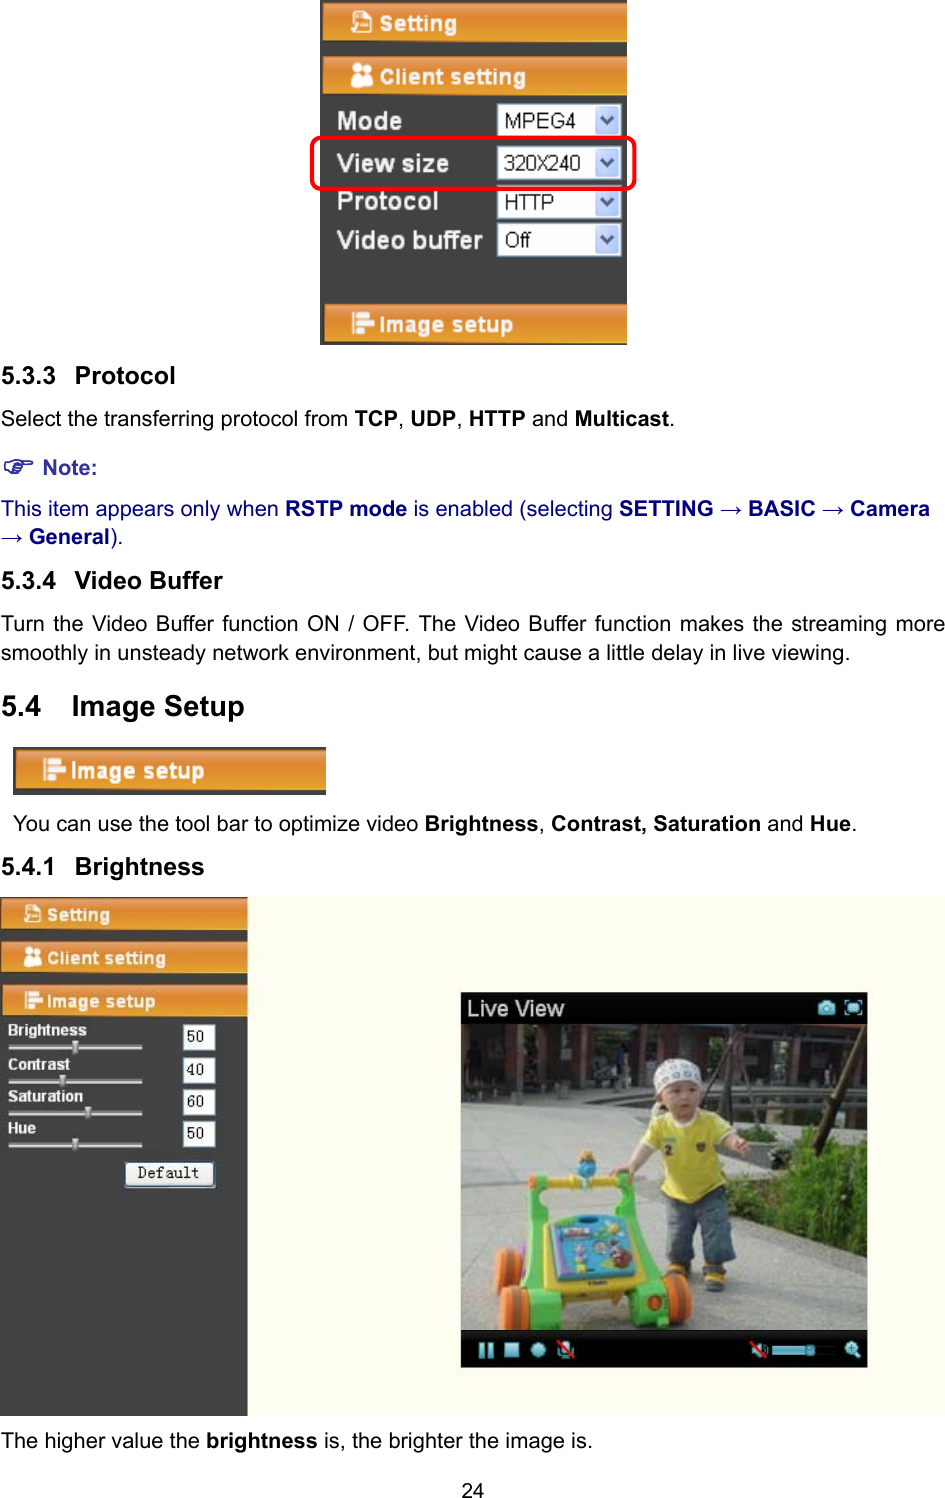 24  5.3.3  Protocol Select the transferring protocol from TCP, UDP, HTTP and Multicast. ) Note: This item appears only when RSTP mode is enabled (selecting SETTING → BASIC → Camera → General). 5.3.4  Video Buffer   Turn the Video Buffer function ON / OFF. The Video Buffer function makes the streaming more smoothly in unsteady network environment, but might cause a little delay in live viewing. 5.4  Image Setup  You can use the tool bar to optimize video Brightness, Contrast, Saturation and Hue.  5.4.1  Brightness  The higher value the brightness is, the brighter the image is. 